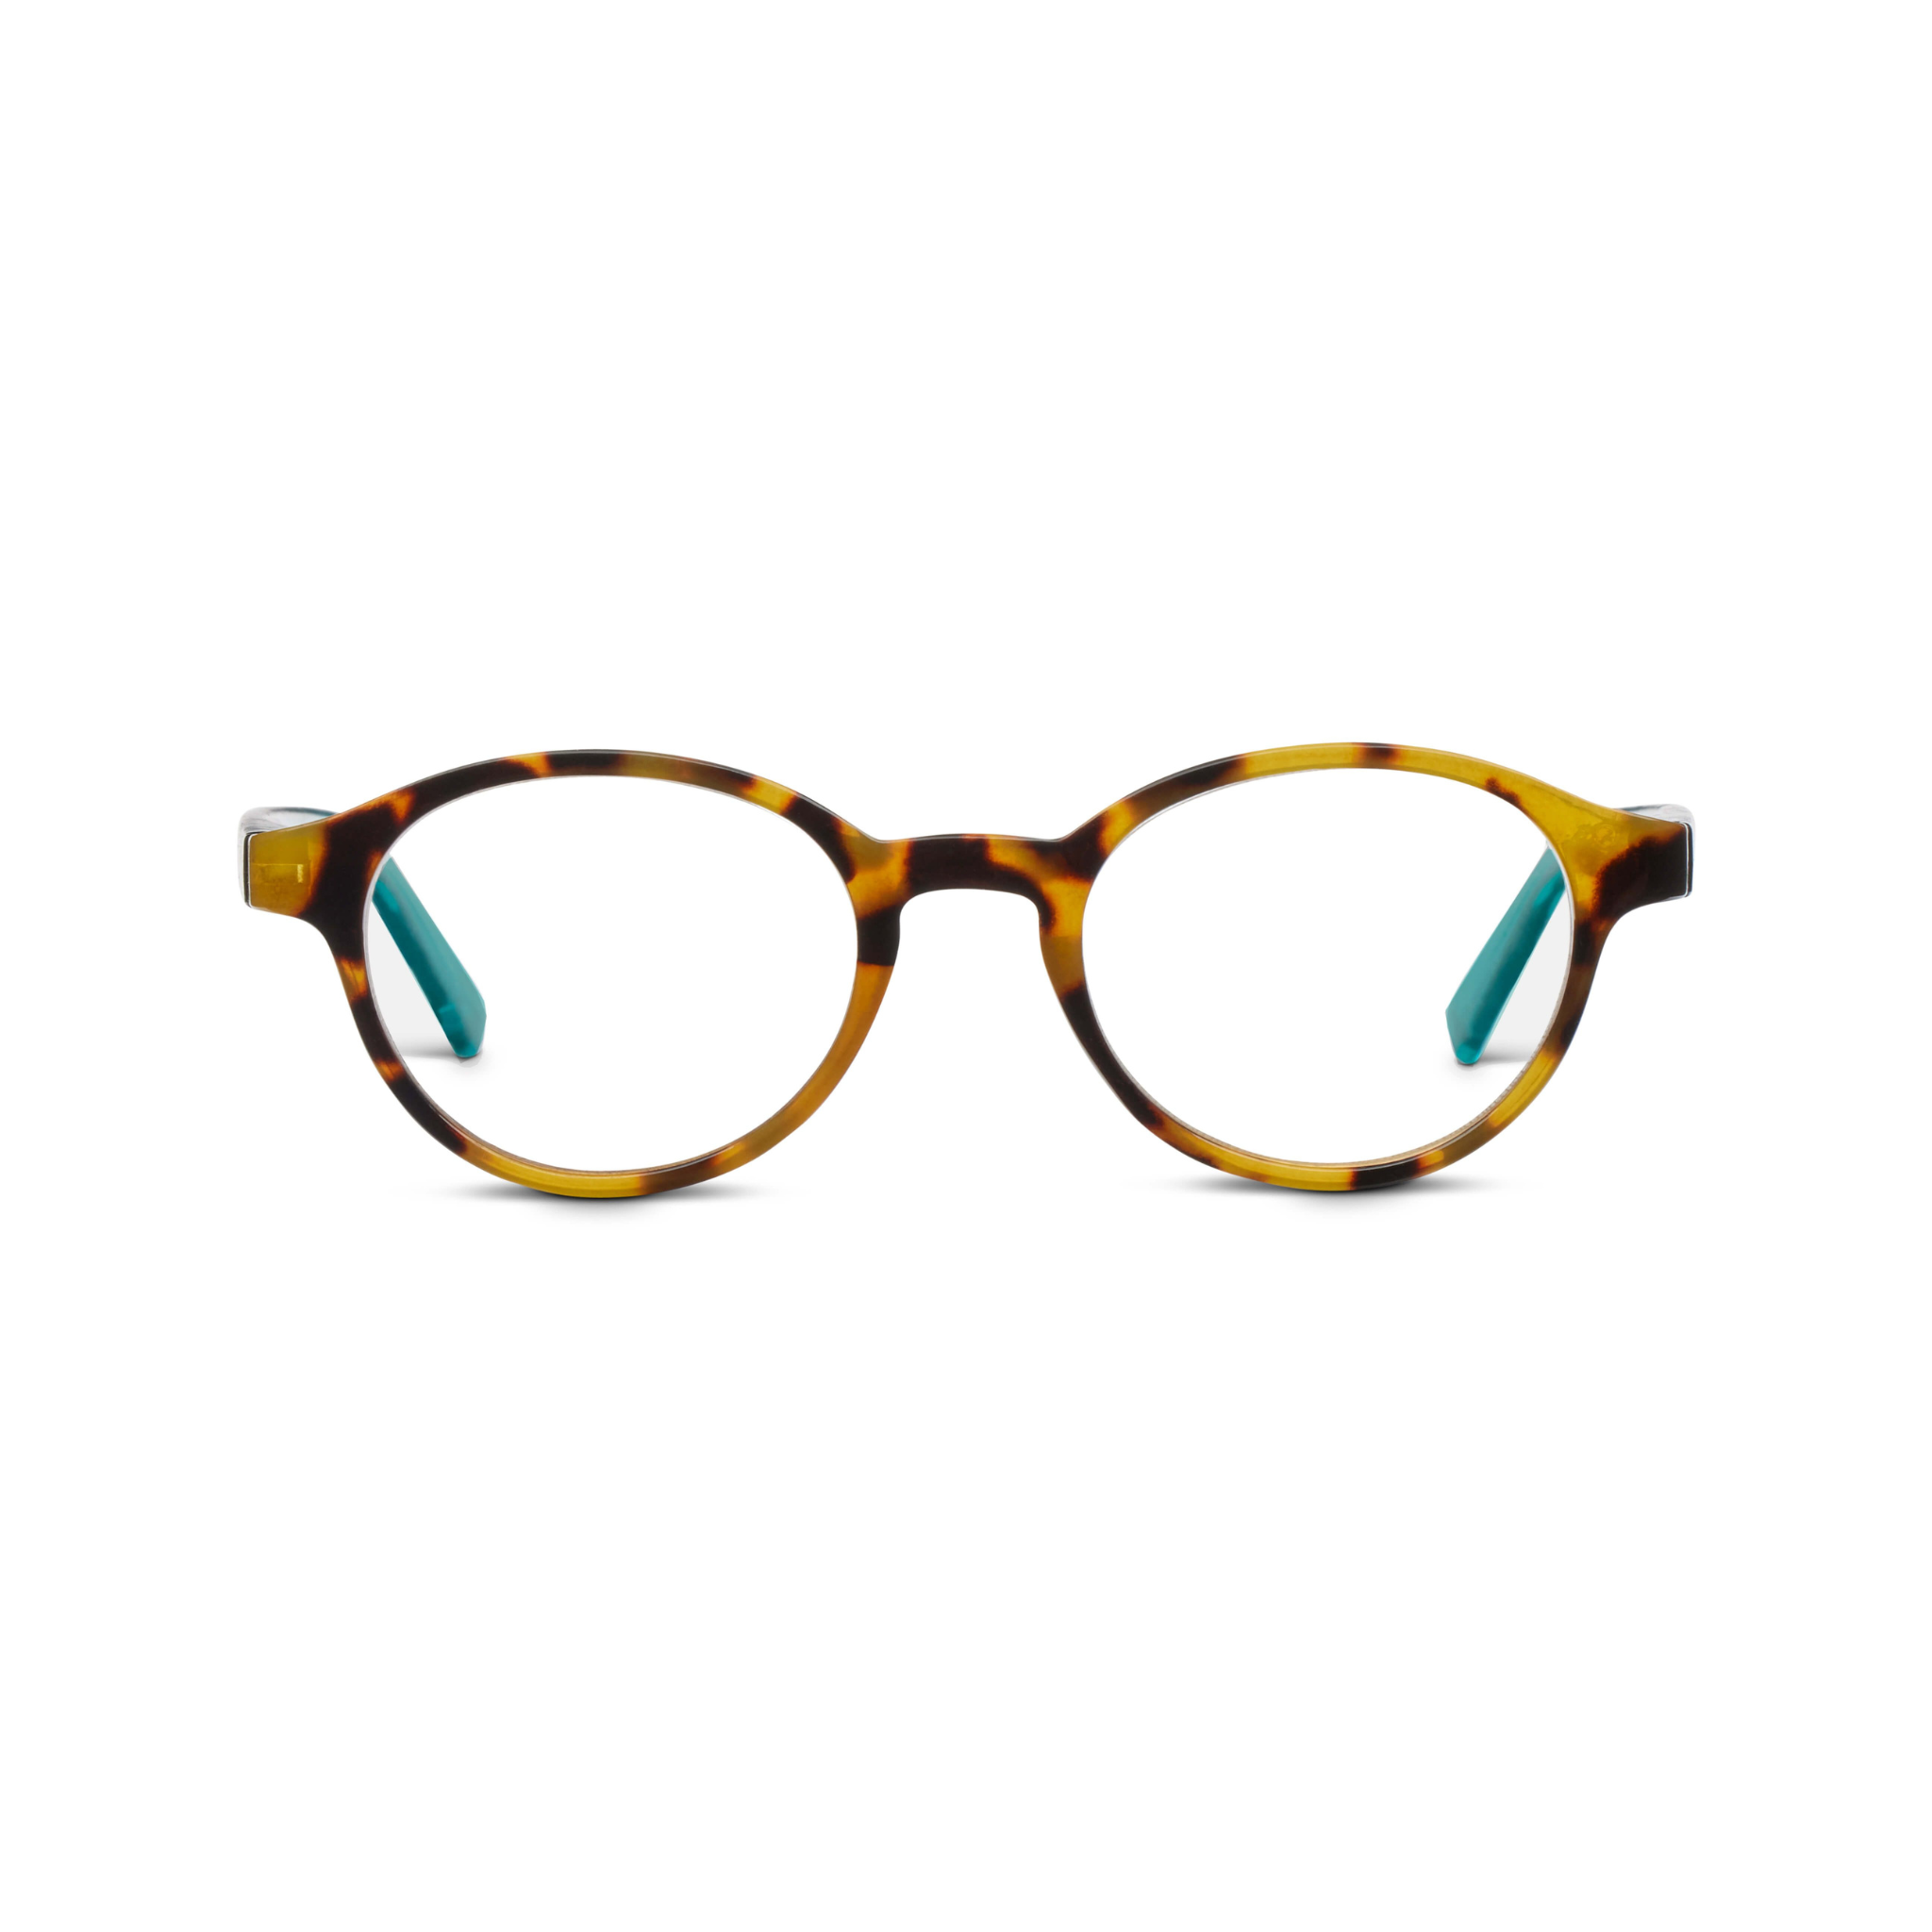 Apollo (Blue Light) - Tokyo Tortoise/Teal / Reading / 3.00 - Peepers by ...